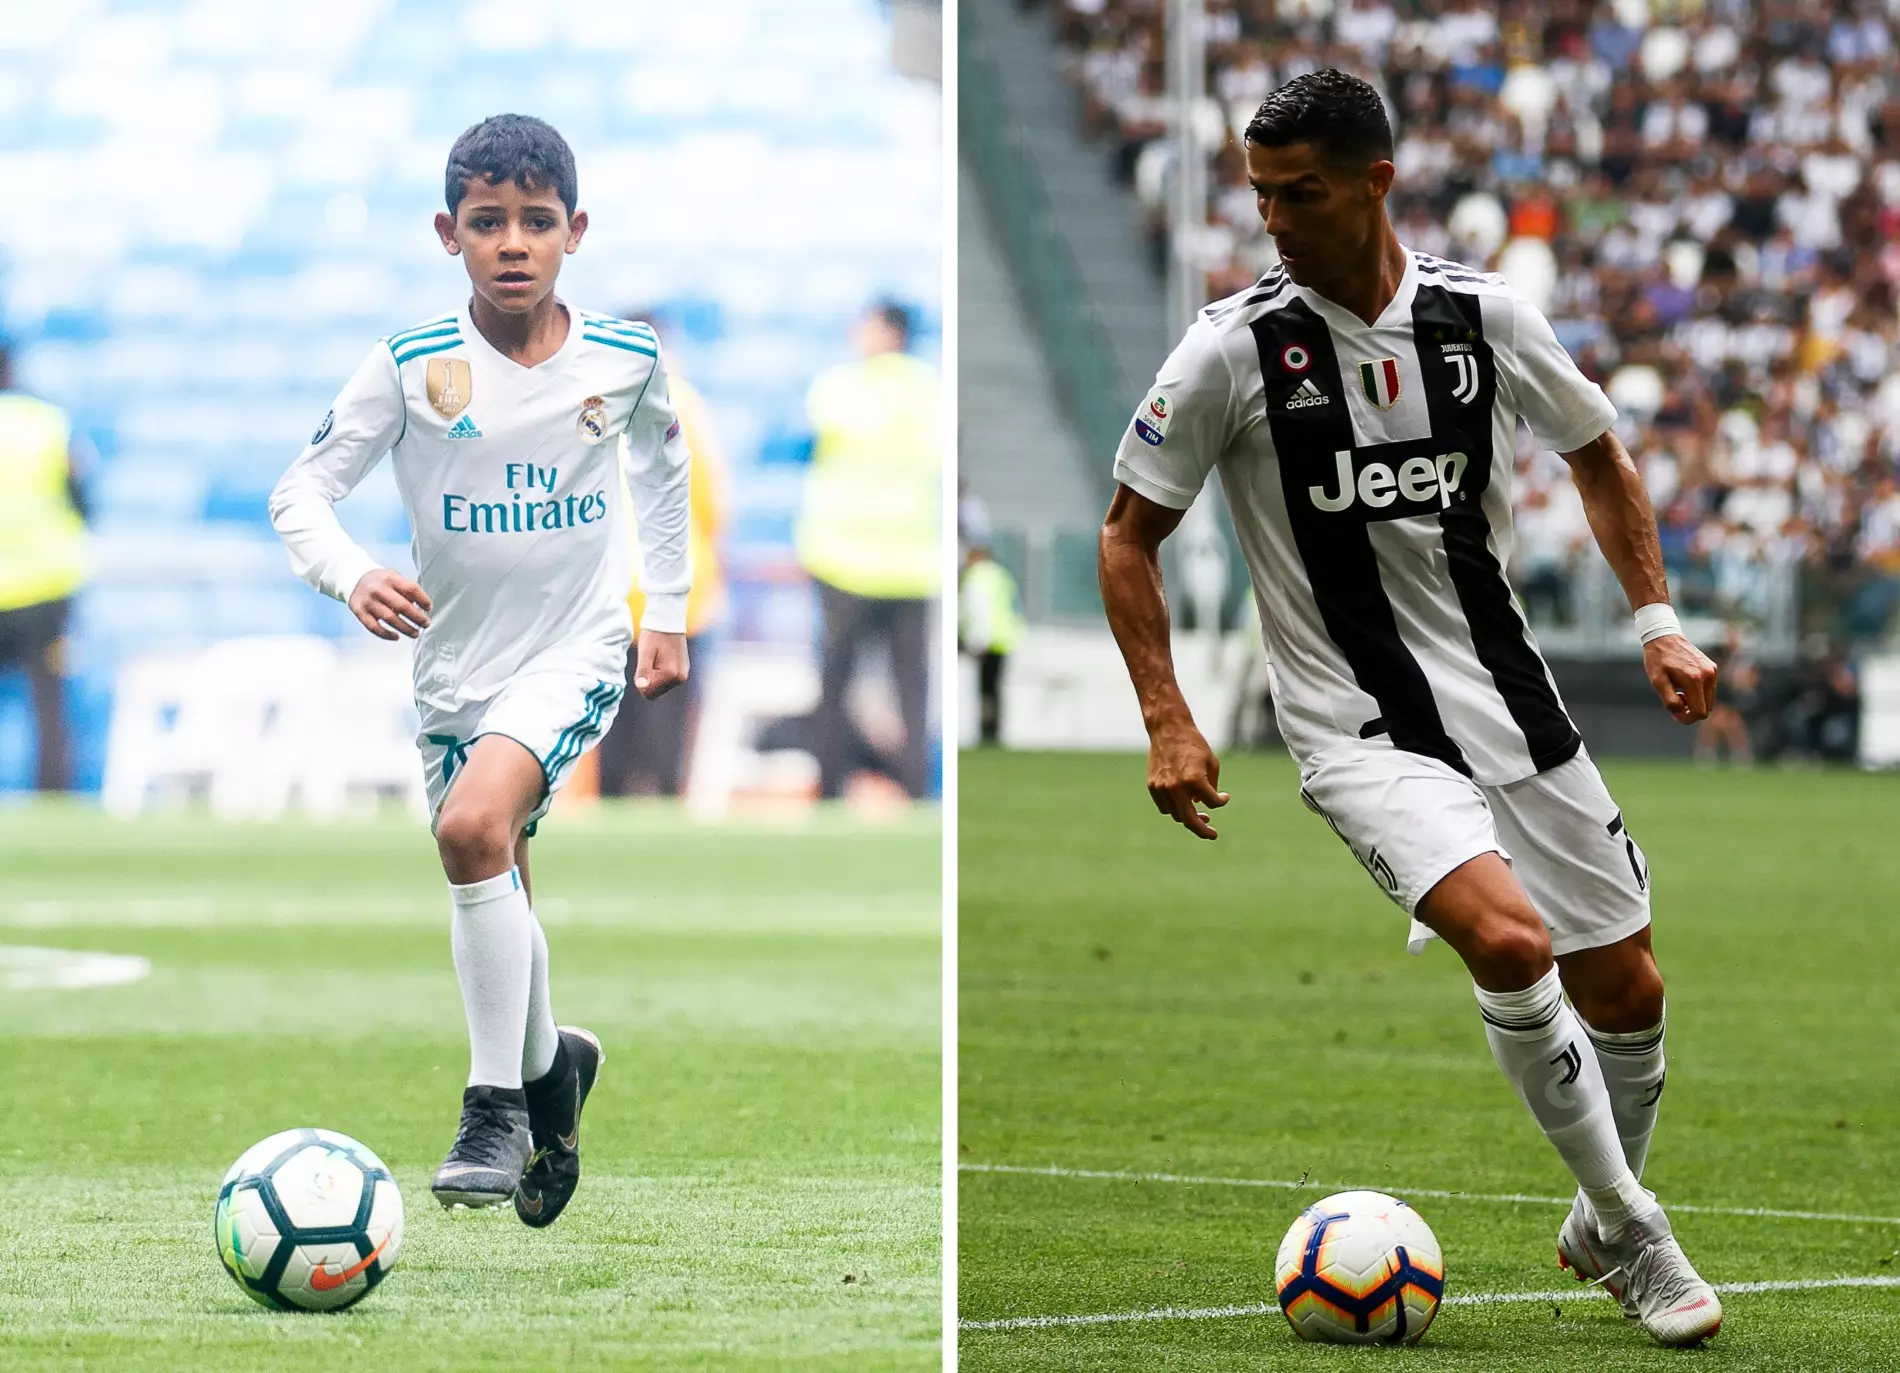 Ronaldo Doesn't Agree With His Son's Bold Claim That He'll Be Better Than Him